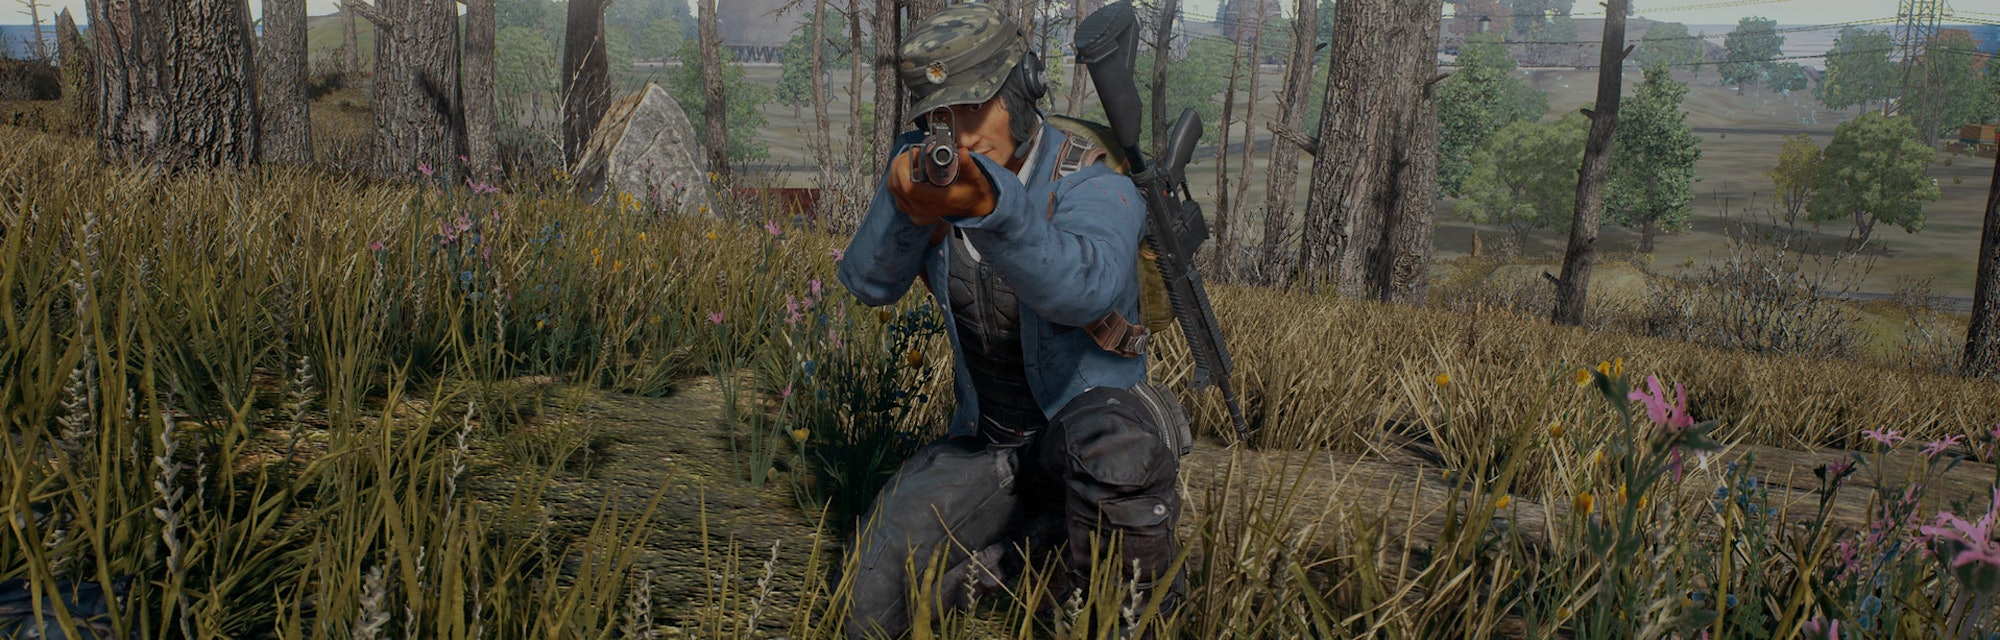 A screenshot of gameplay from PUBG